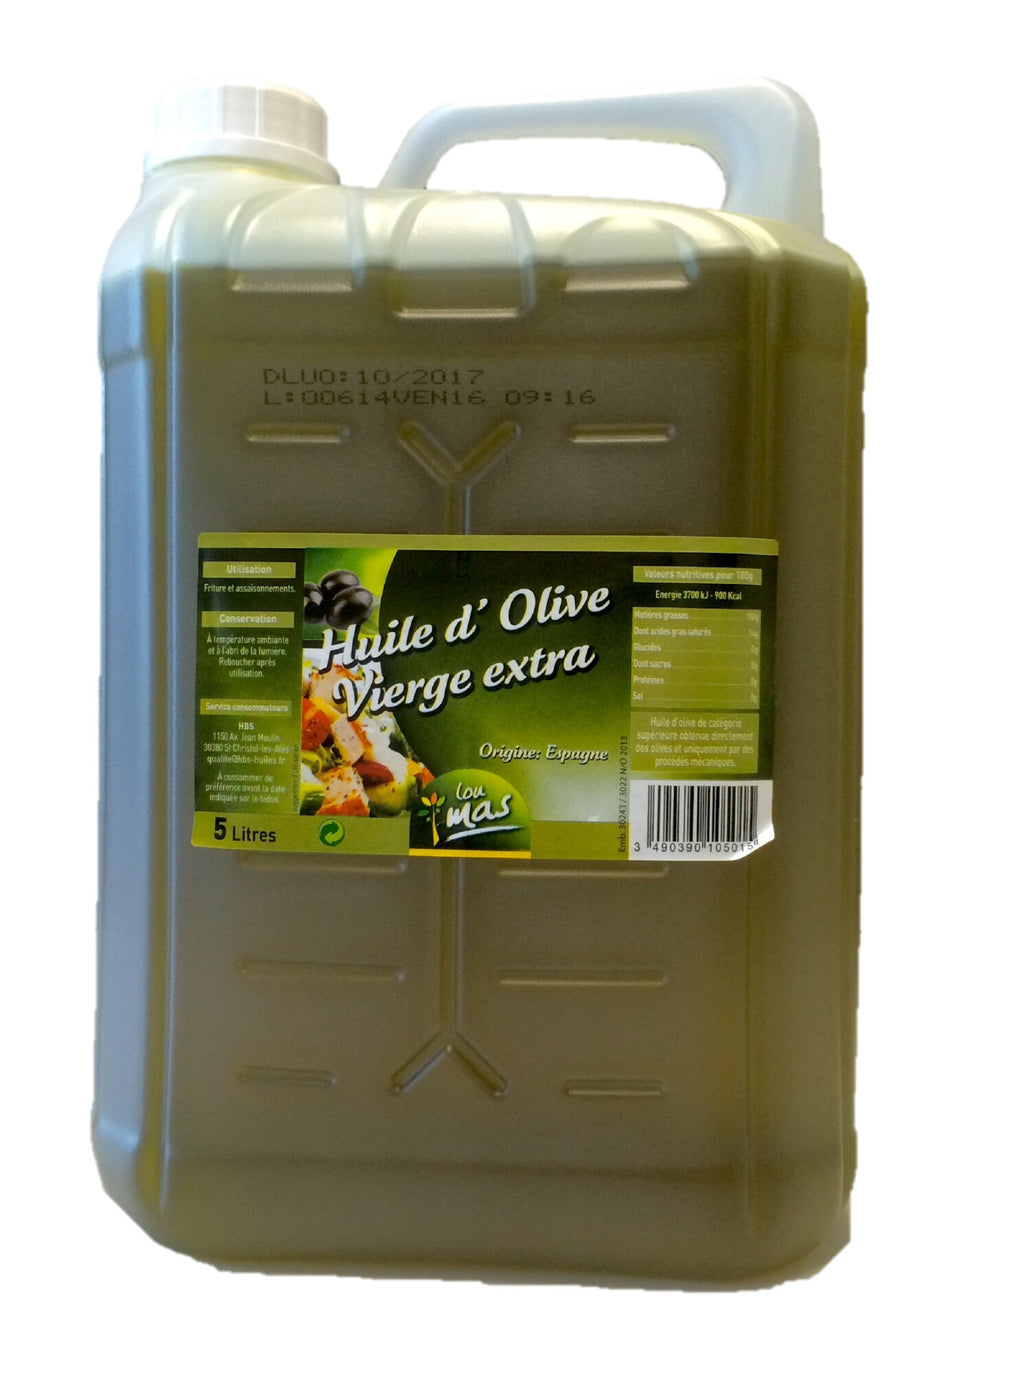 HUILE D’OLIVE VIERGE EXTRA BIDON 5 LITRES